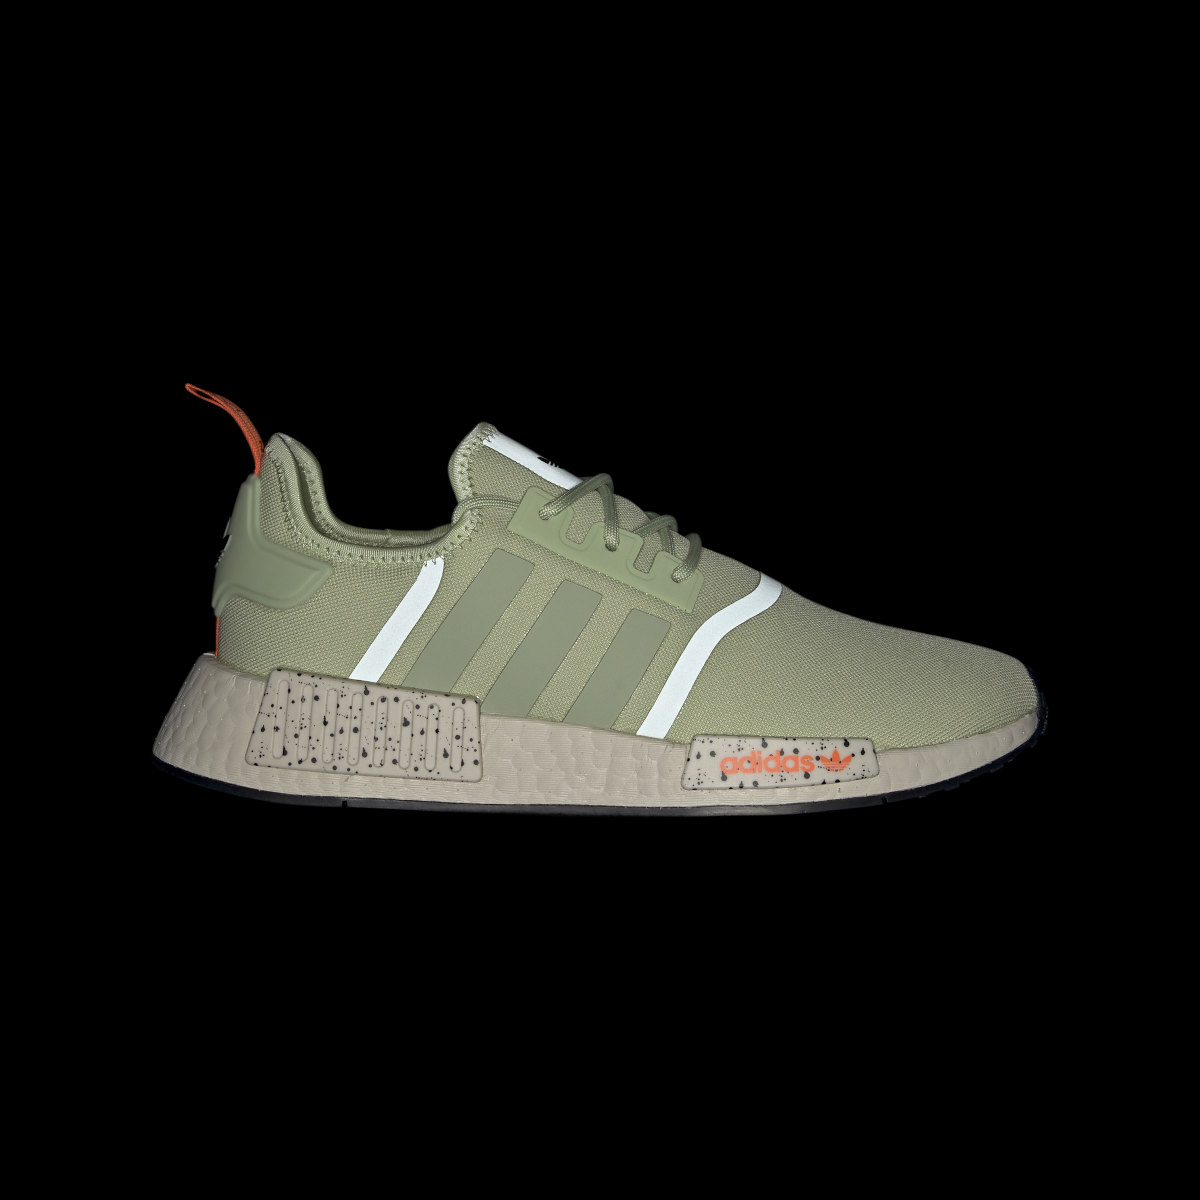 Adidas NMD_R1 Shoes. 4